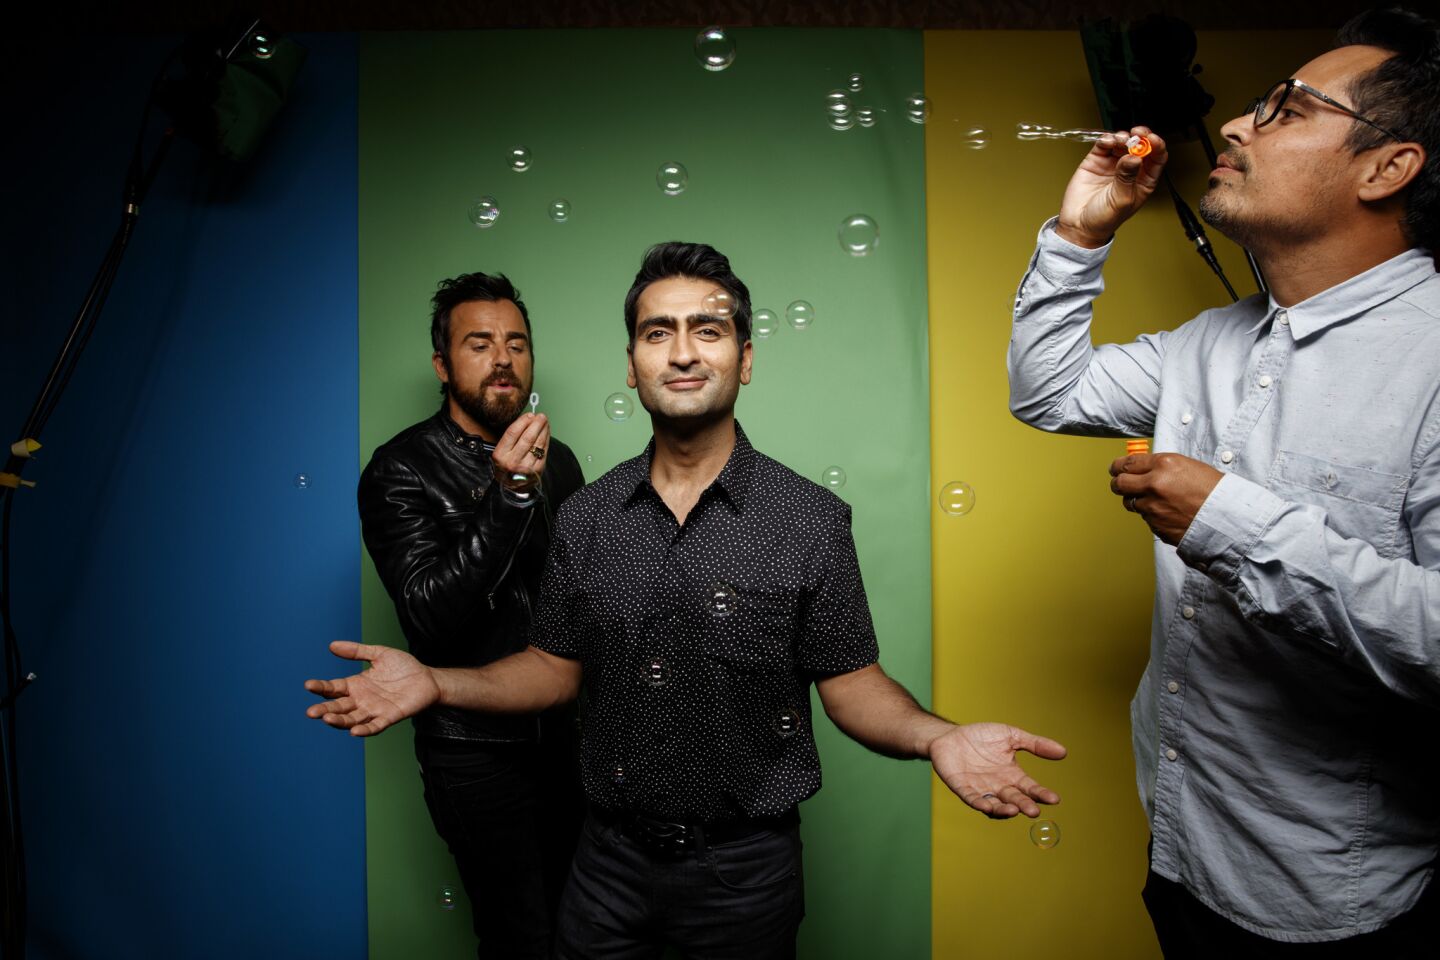 Justin Theroux, Kumail Nanjiani, and Michael Pena, from the film "The Lego Ninjago Movie," photographed in the L.A. Times photo studio at Comic-Con 2017.